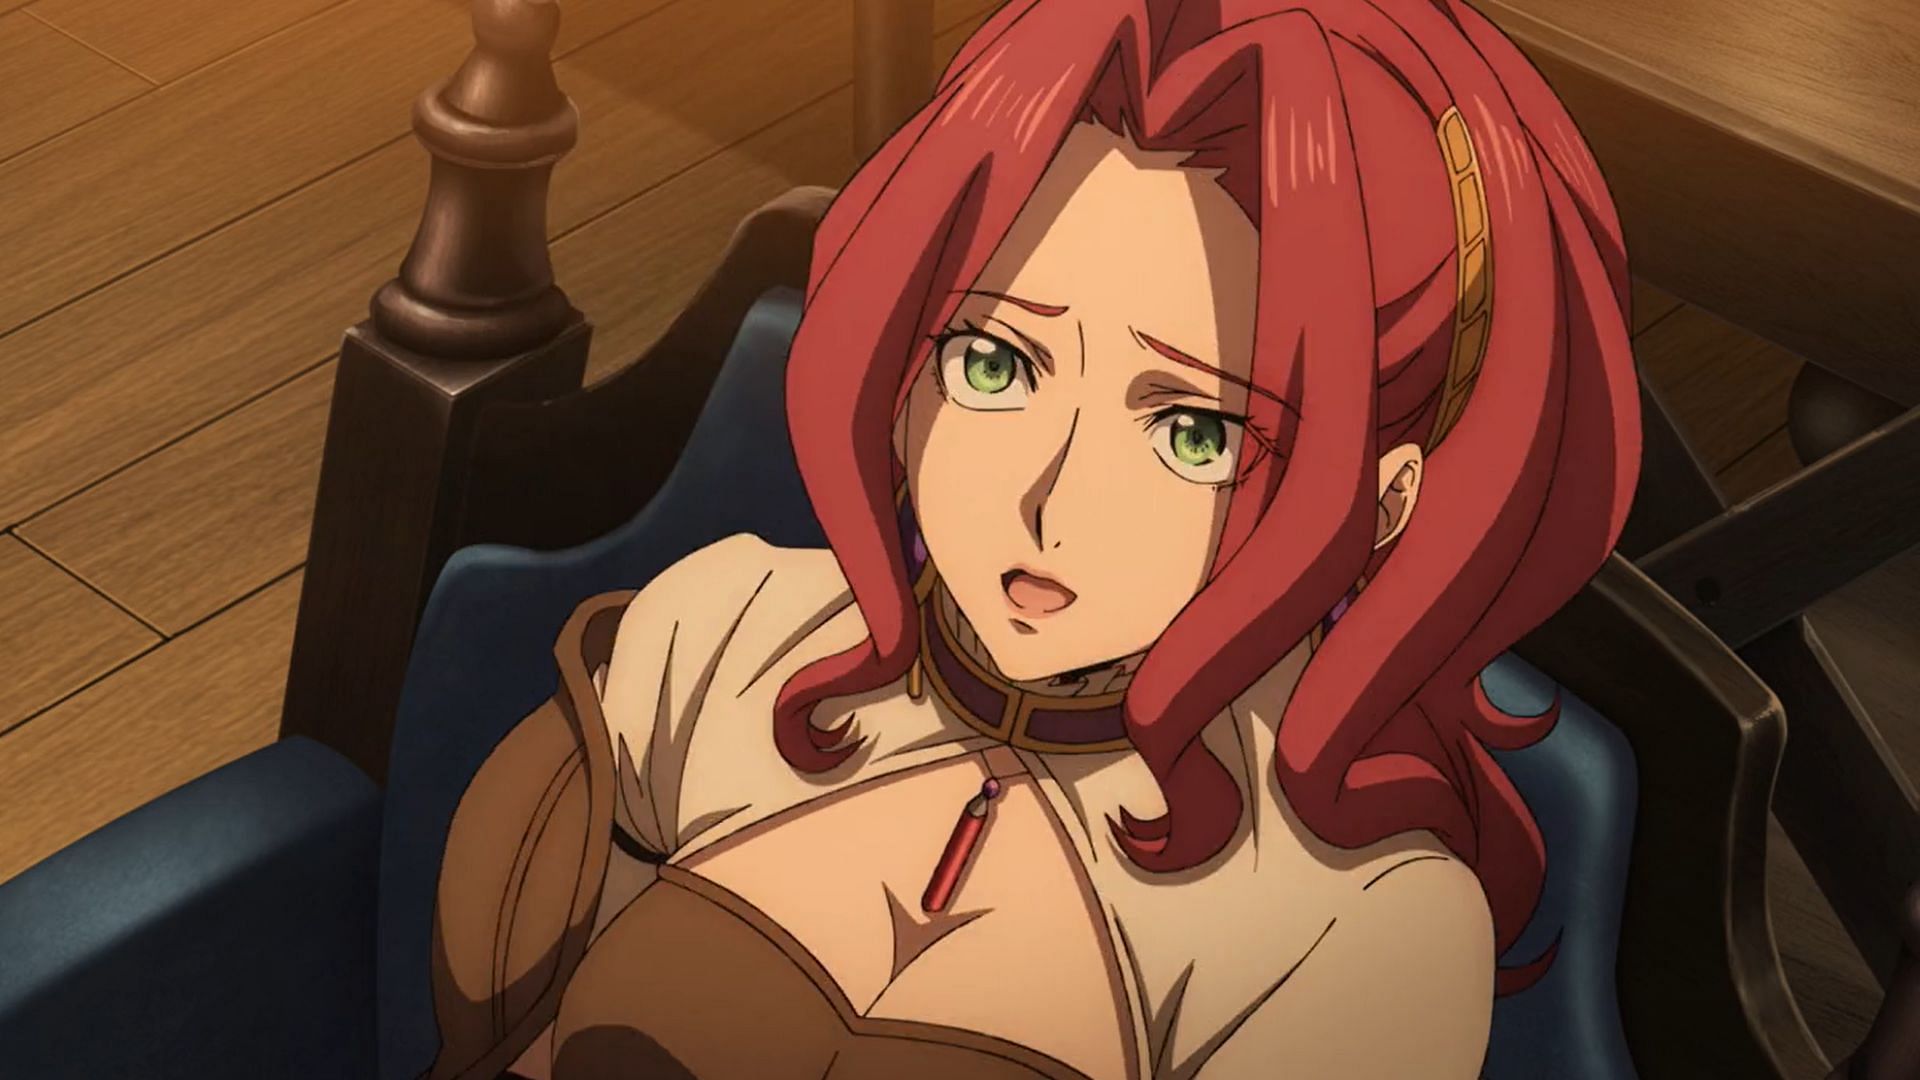 Malty as seen in The Rising of the Shield Hero (Image via Kinema Citrus)